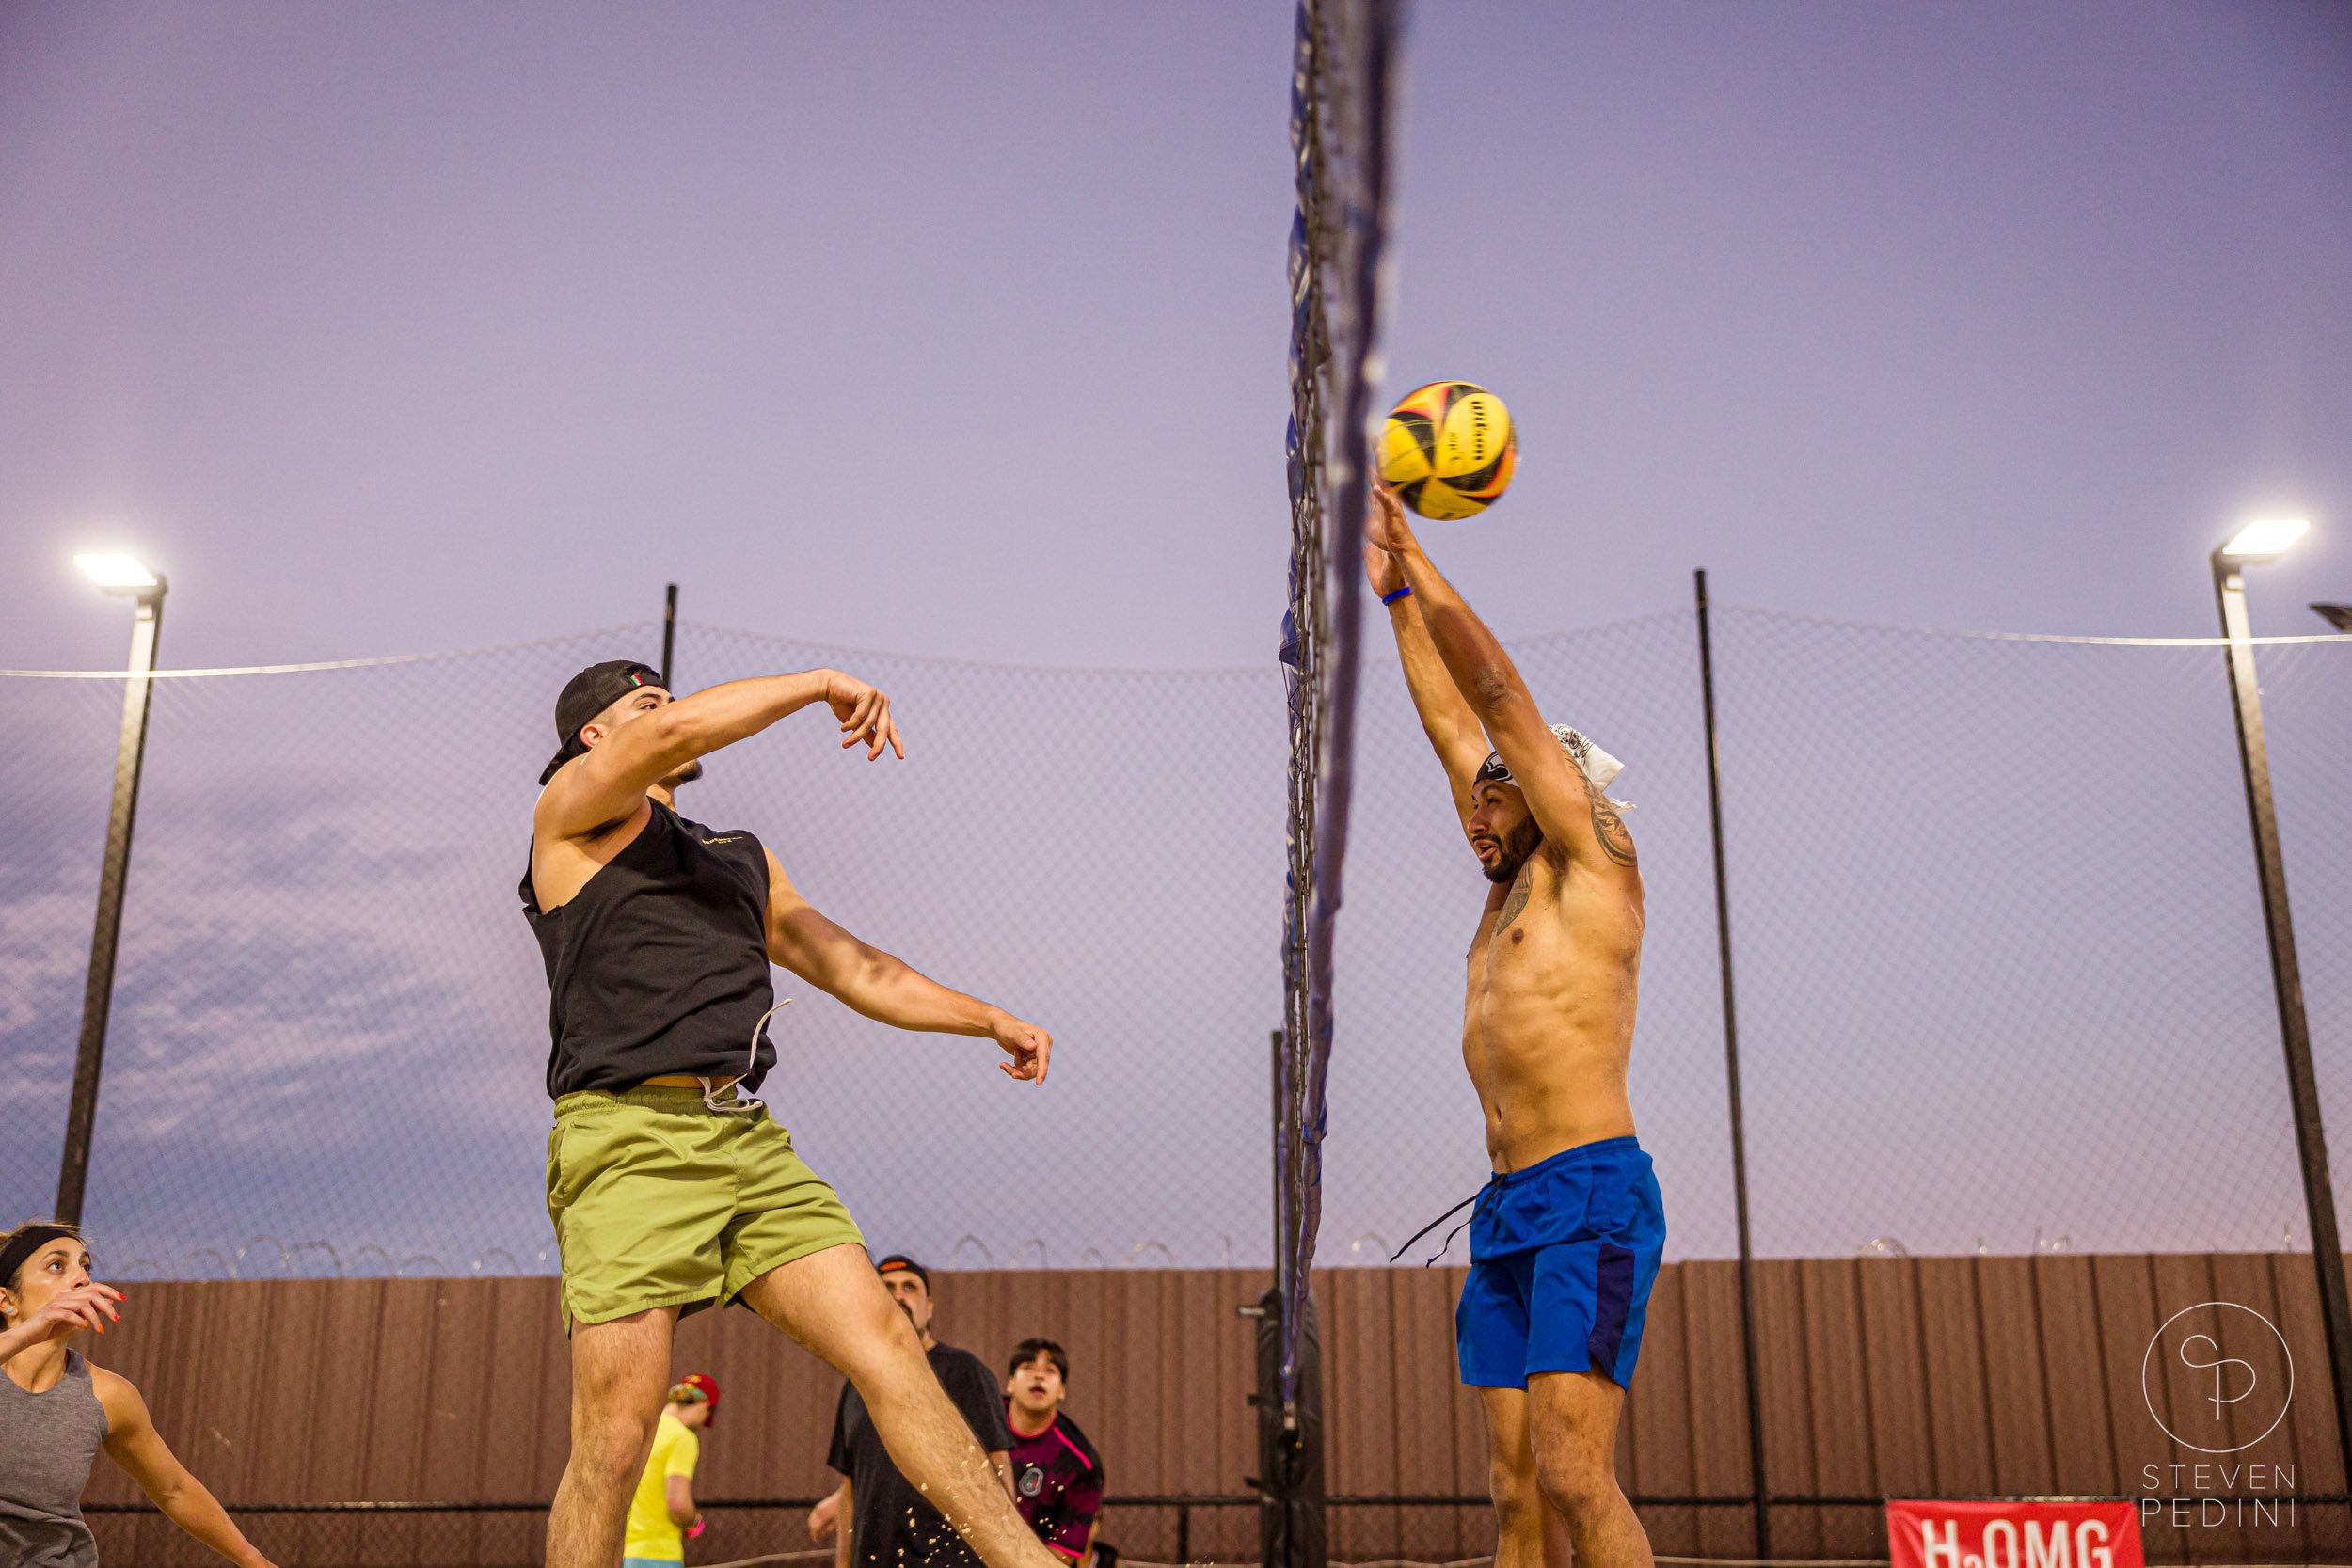 Steven Pedini Photography - Bumpy Pickle - Sand Volleyball - Houston TX - World Cup of Volleyball - 00293.jpg